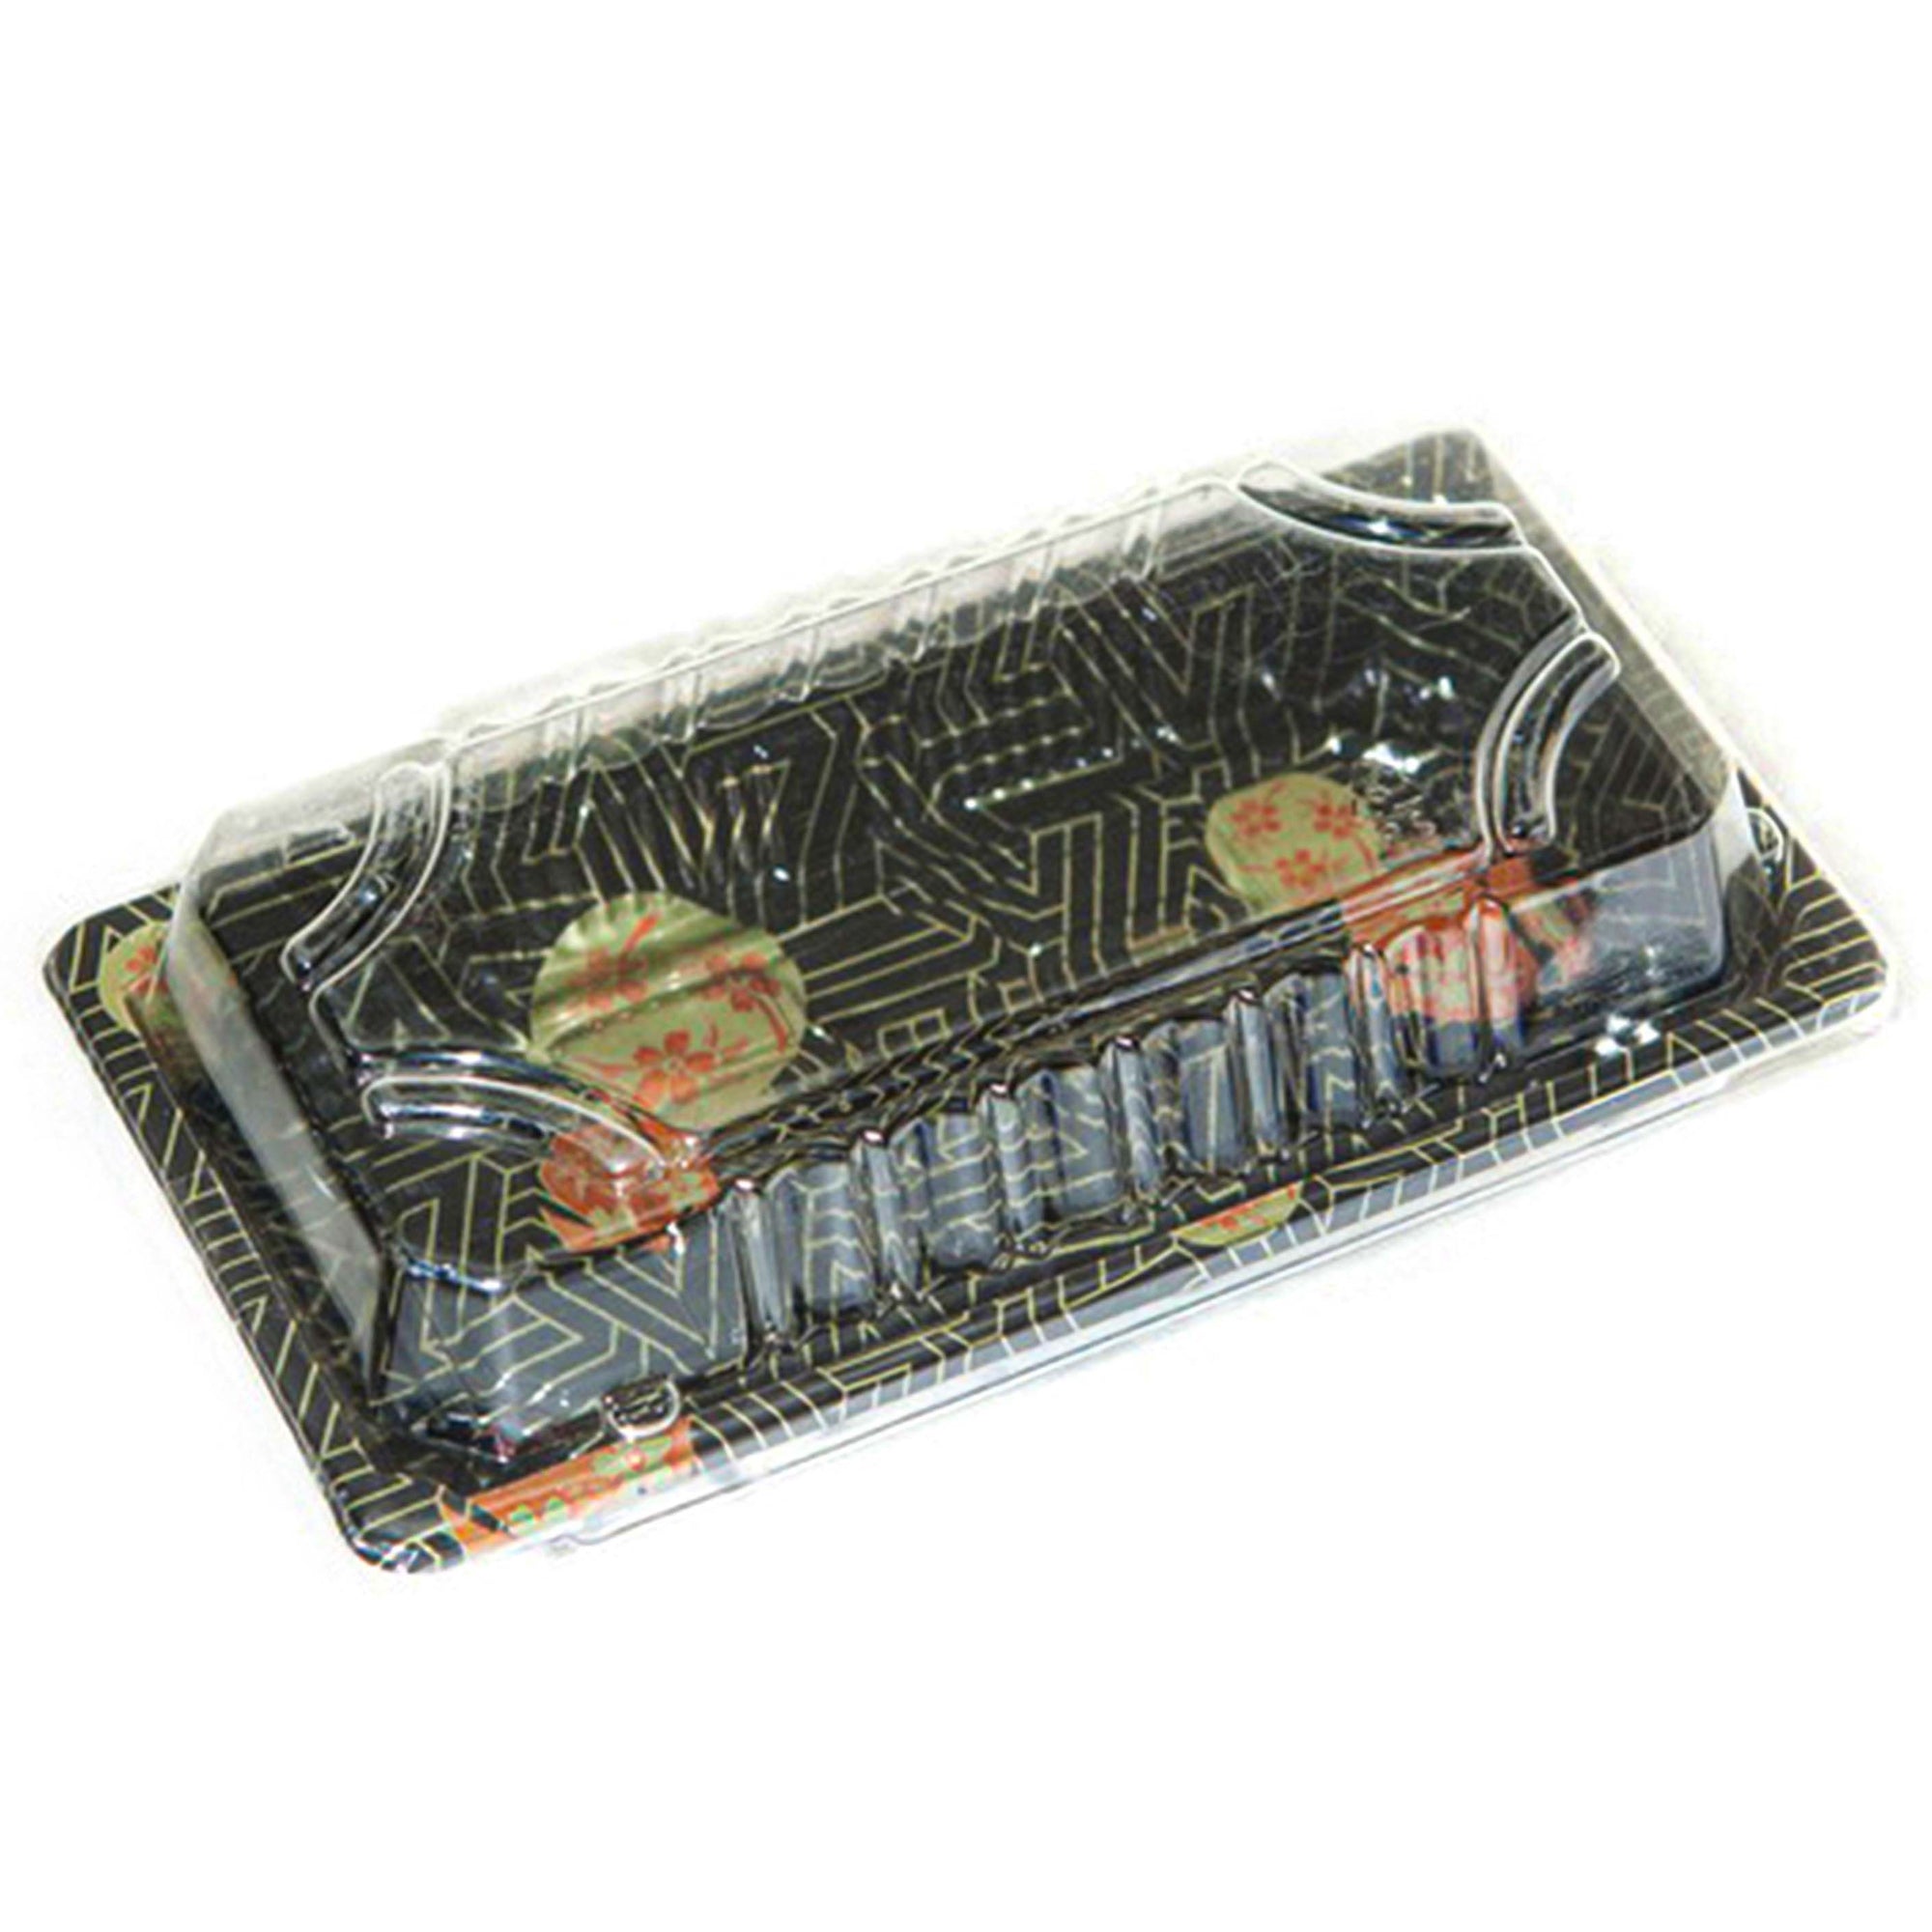 TZ-0.6 Disposable Black Sakura Design Take Out Sushi Trays with Clear Lids  6 3/8